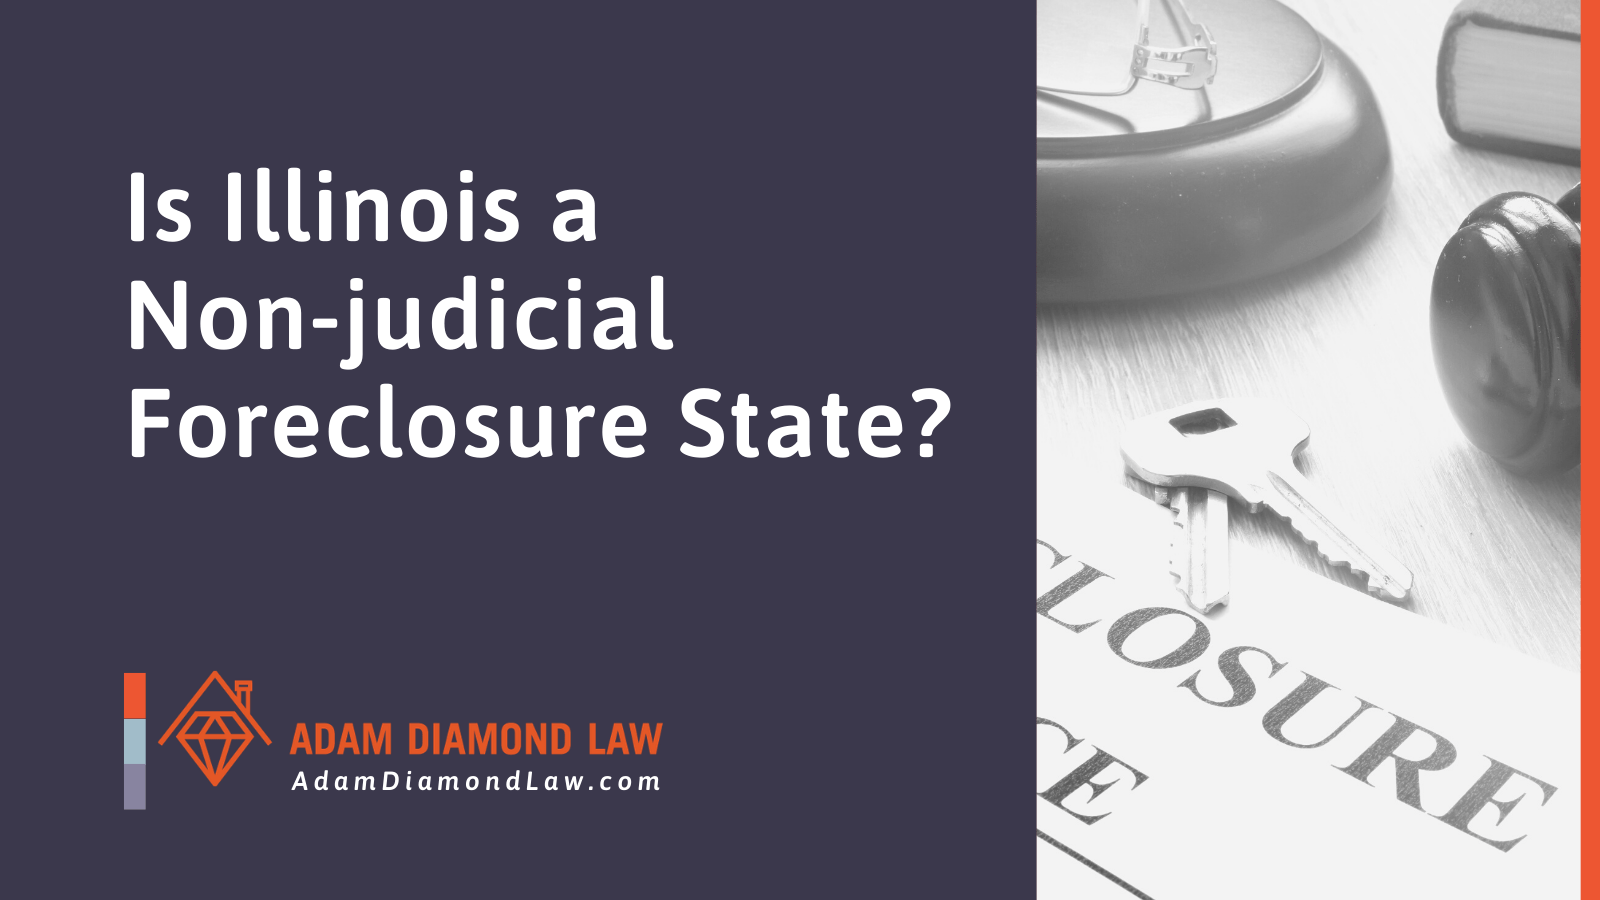 Is Illinois a Non-judicial Foreclosure State - Adam Diamond Law | McHenry, IL Residential Real Estate Lawyer